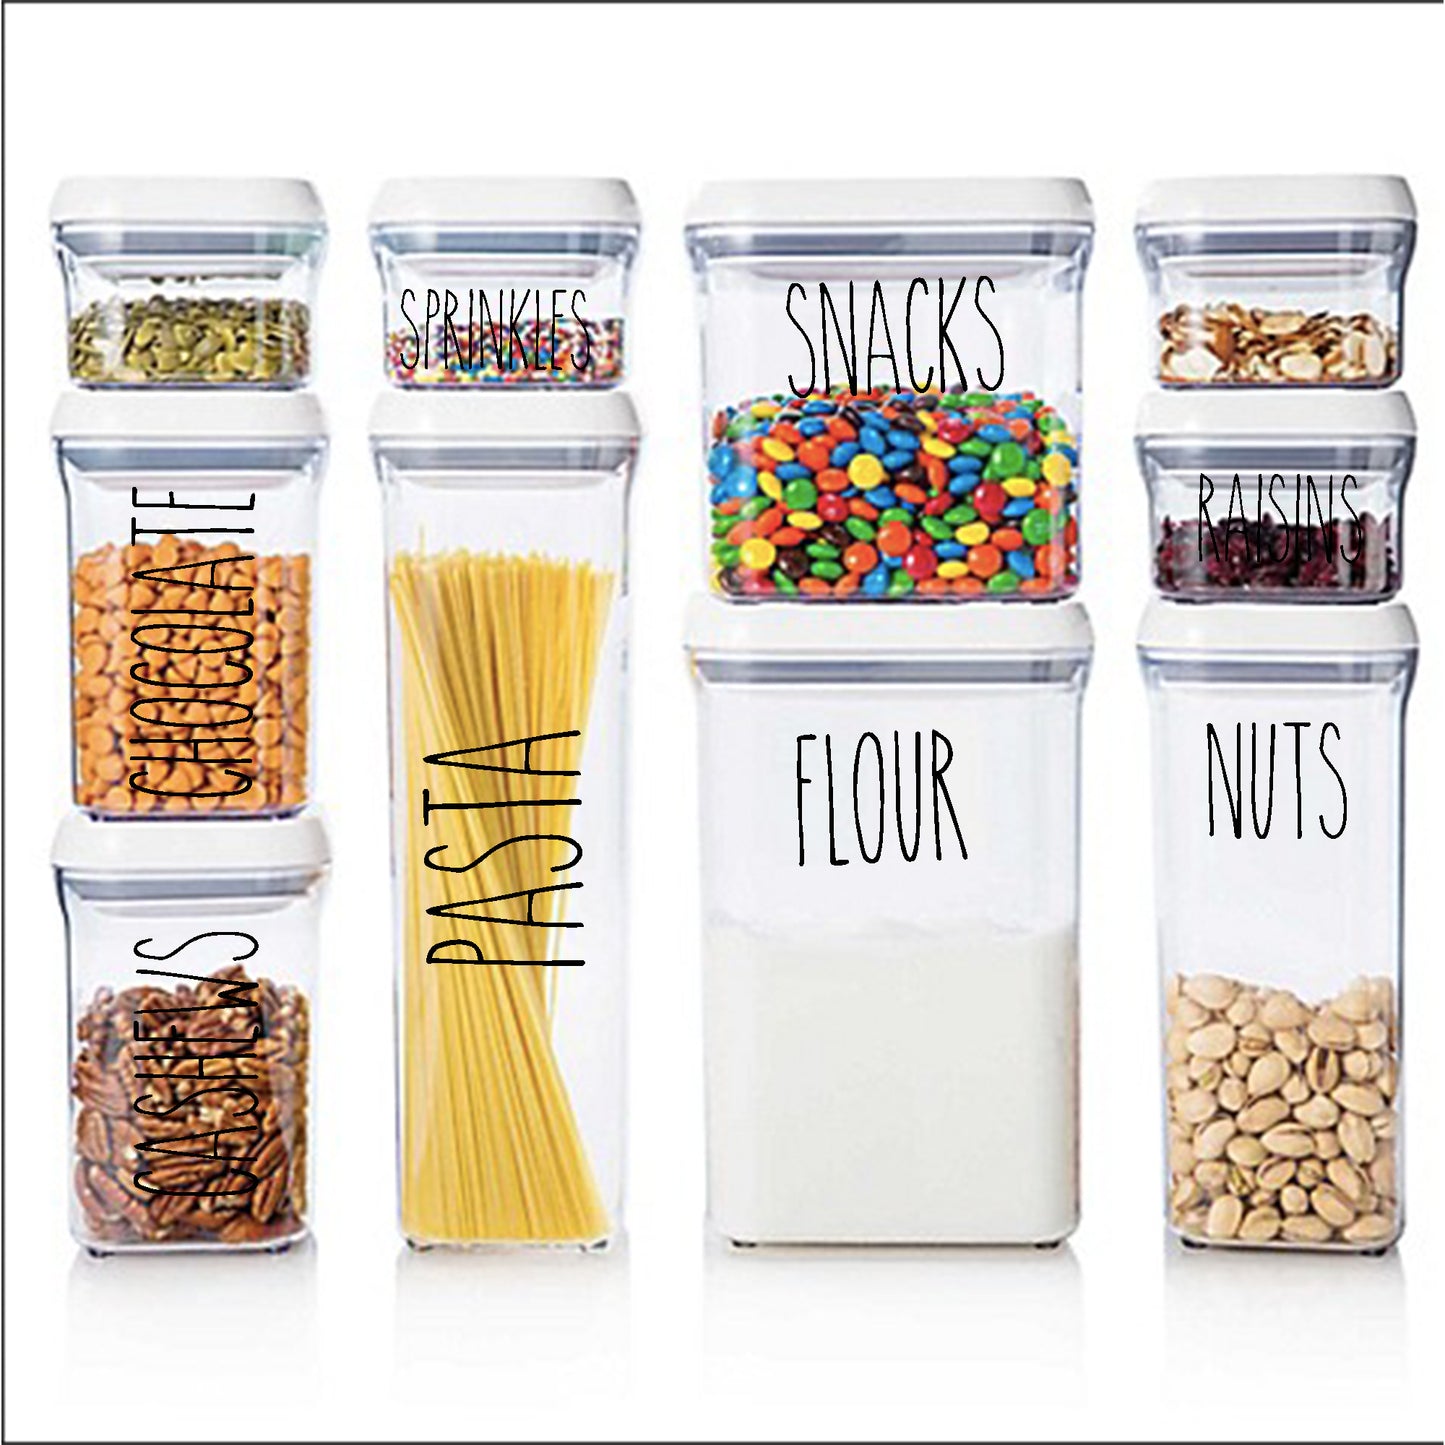 Pantry Labels Rae Dunn inspired⎮Canister labels ⎮ pantry decals ⎮ farmhouse style labels ⎮ pantry organization